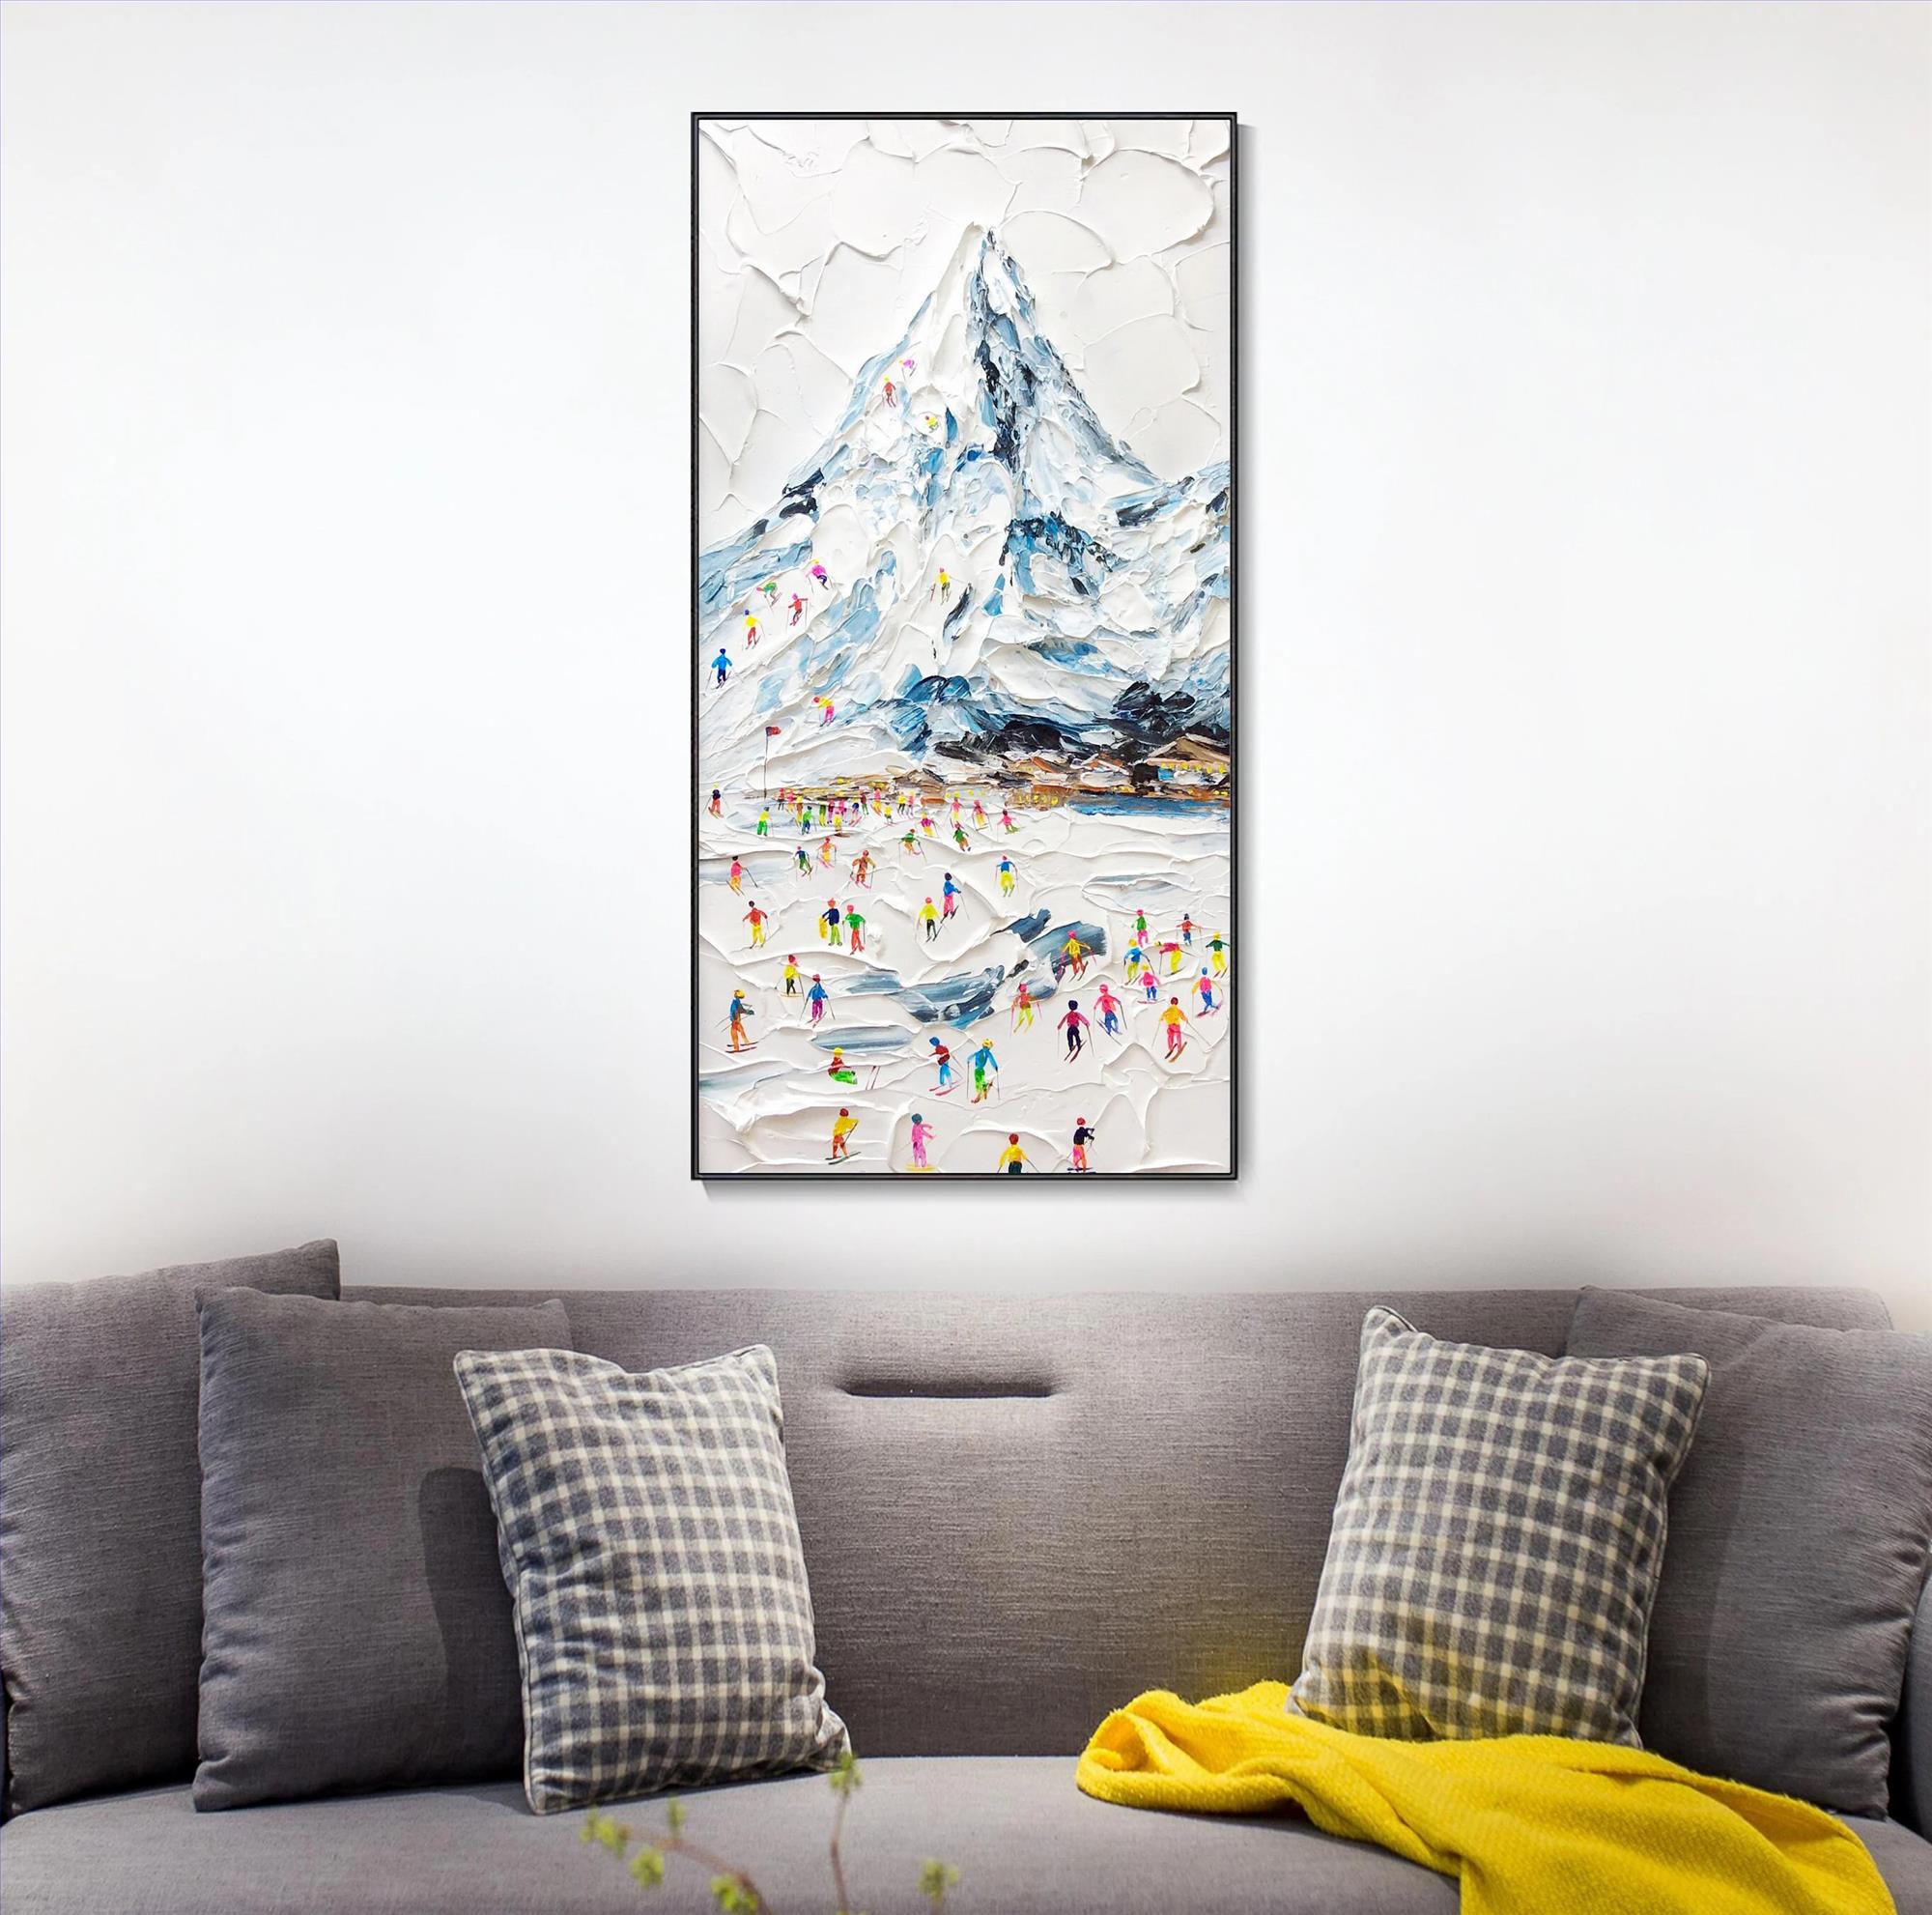 Skier on Snowy Mountain Wall Art Sport White Snow Skiing Room Decor by Knife 16 Oil Paintings